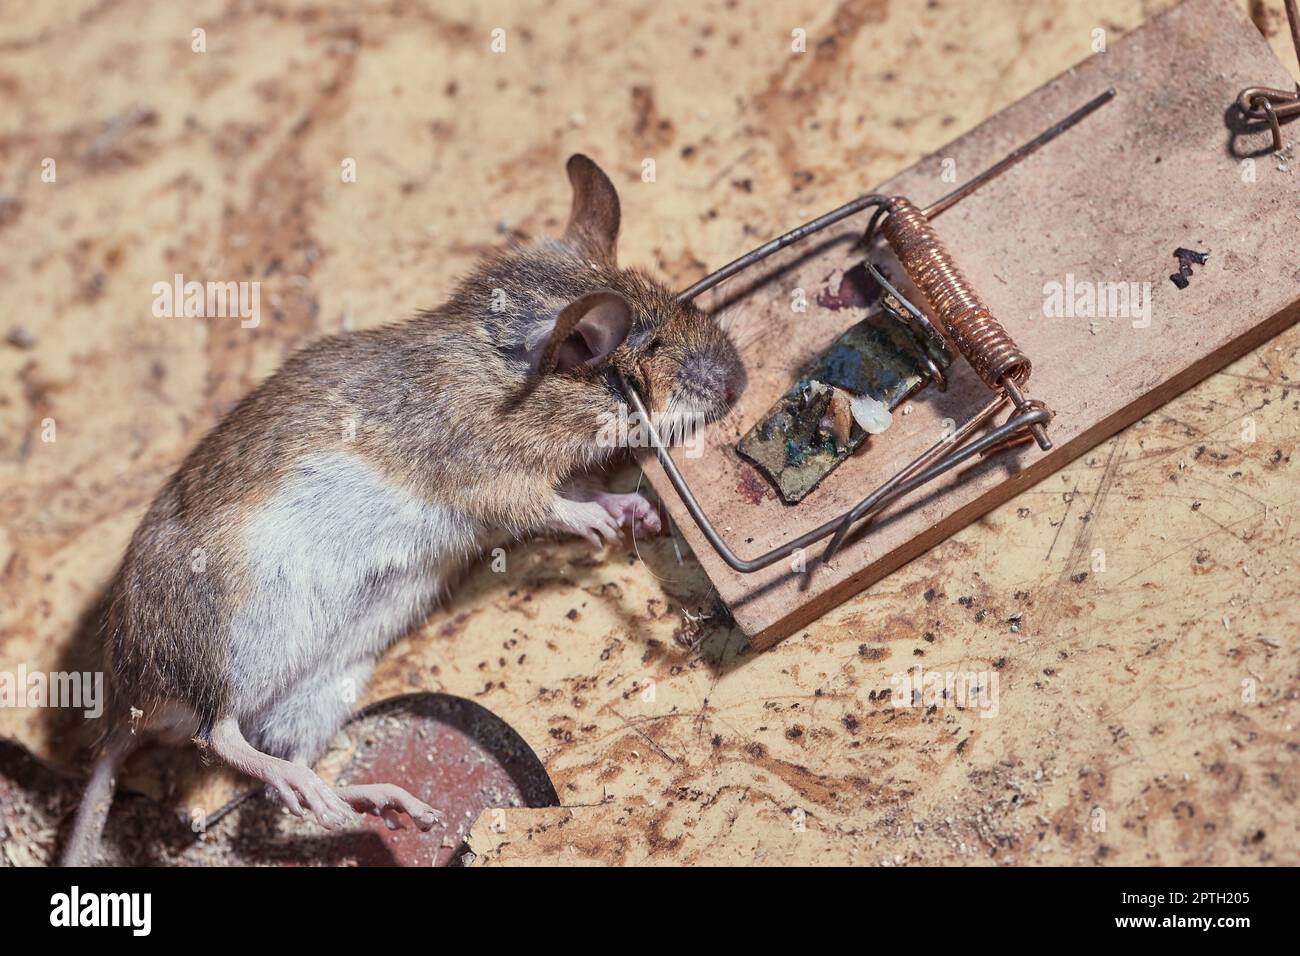 https://c8.alamy.com/comp/2PTH205/mouse-caught-in-a-trap-on-the-attic-2PTH205.jpg